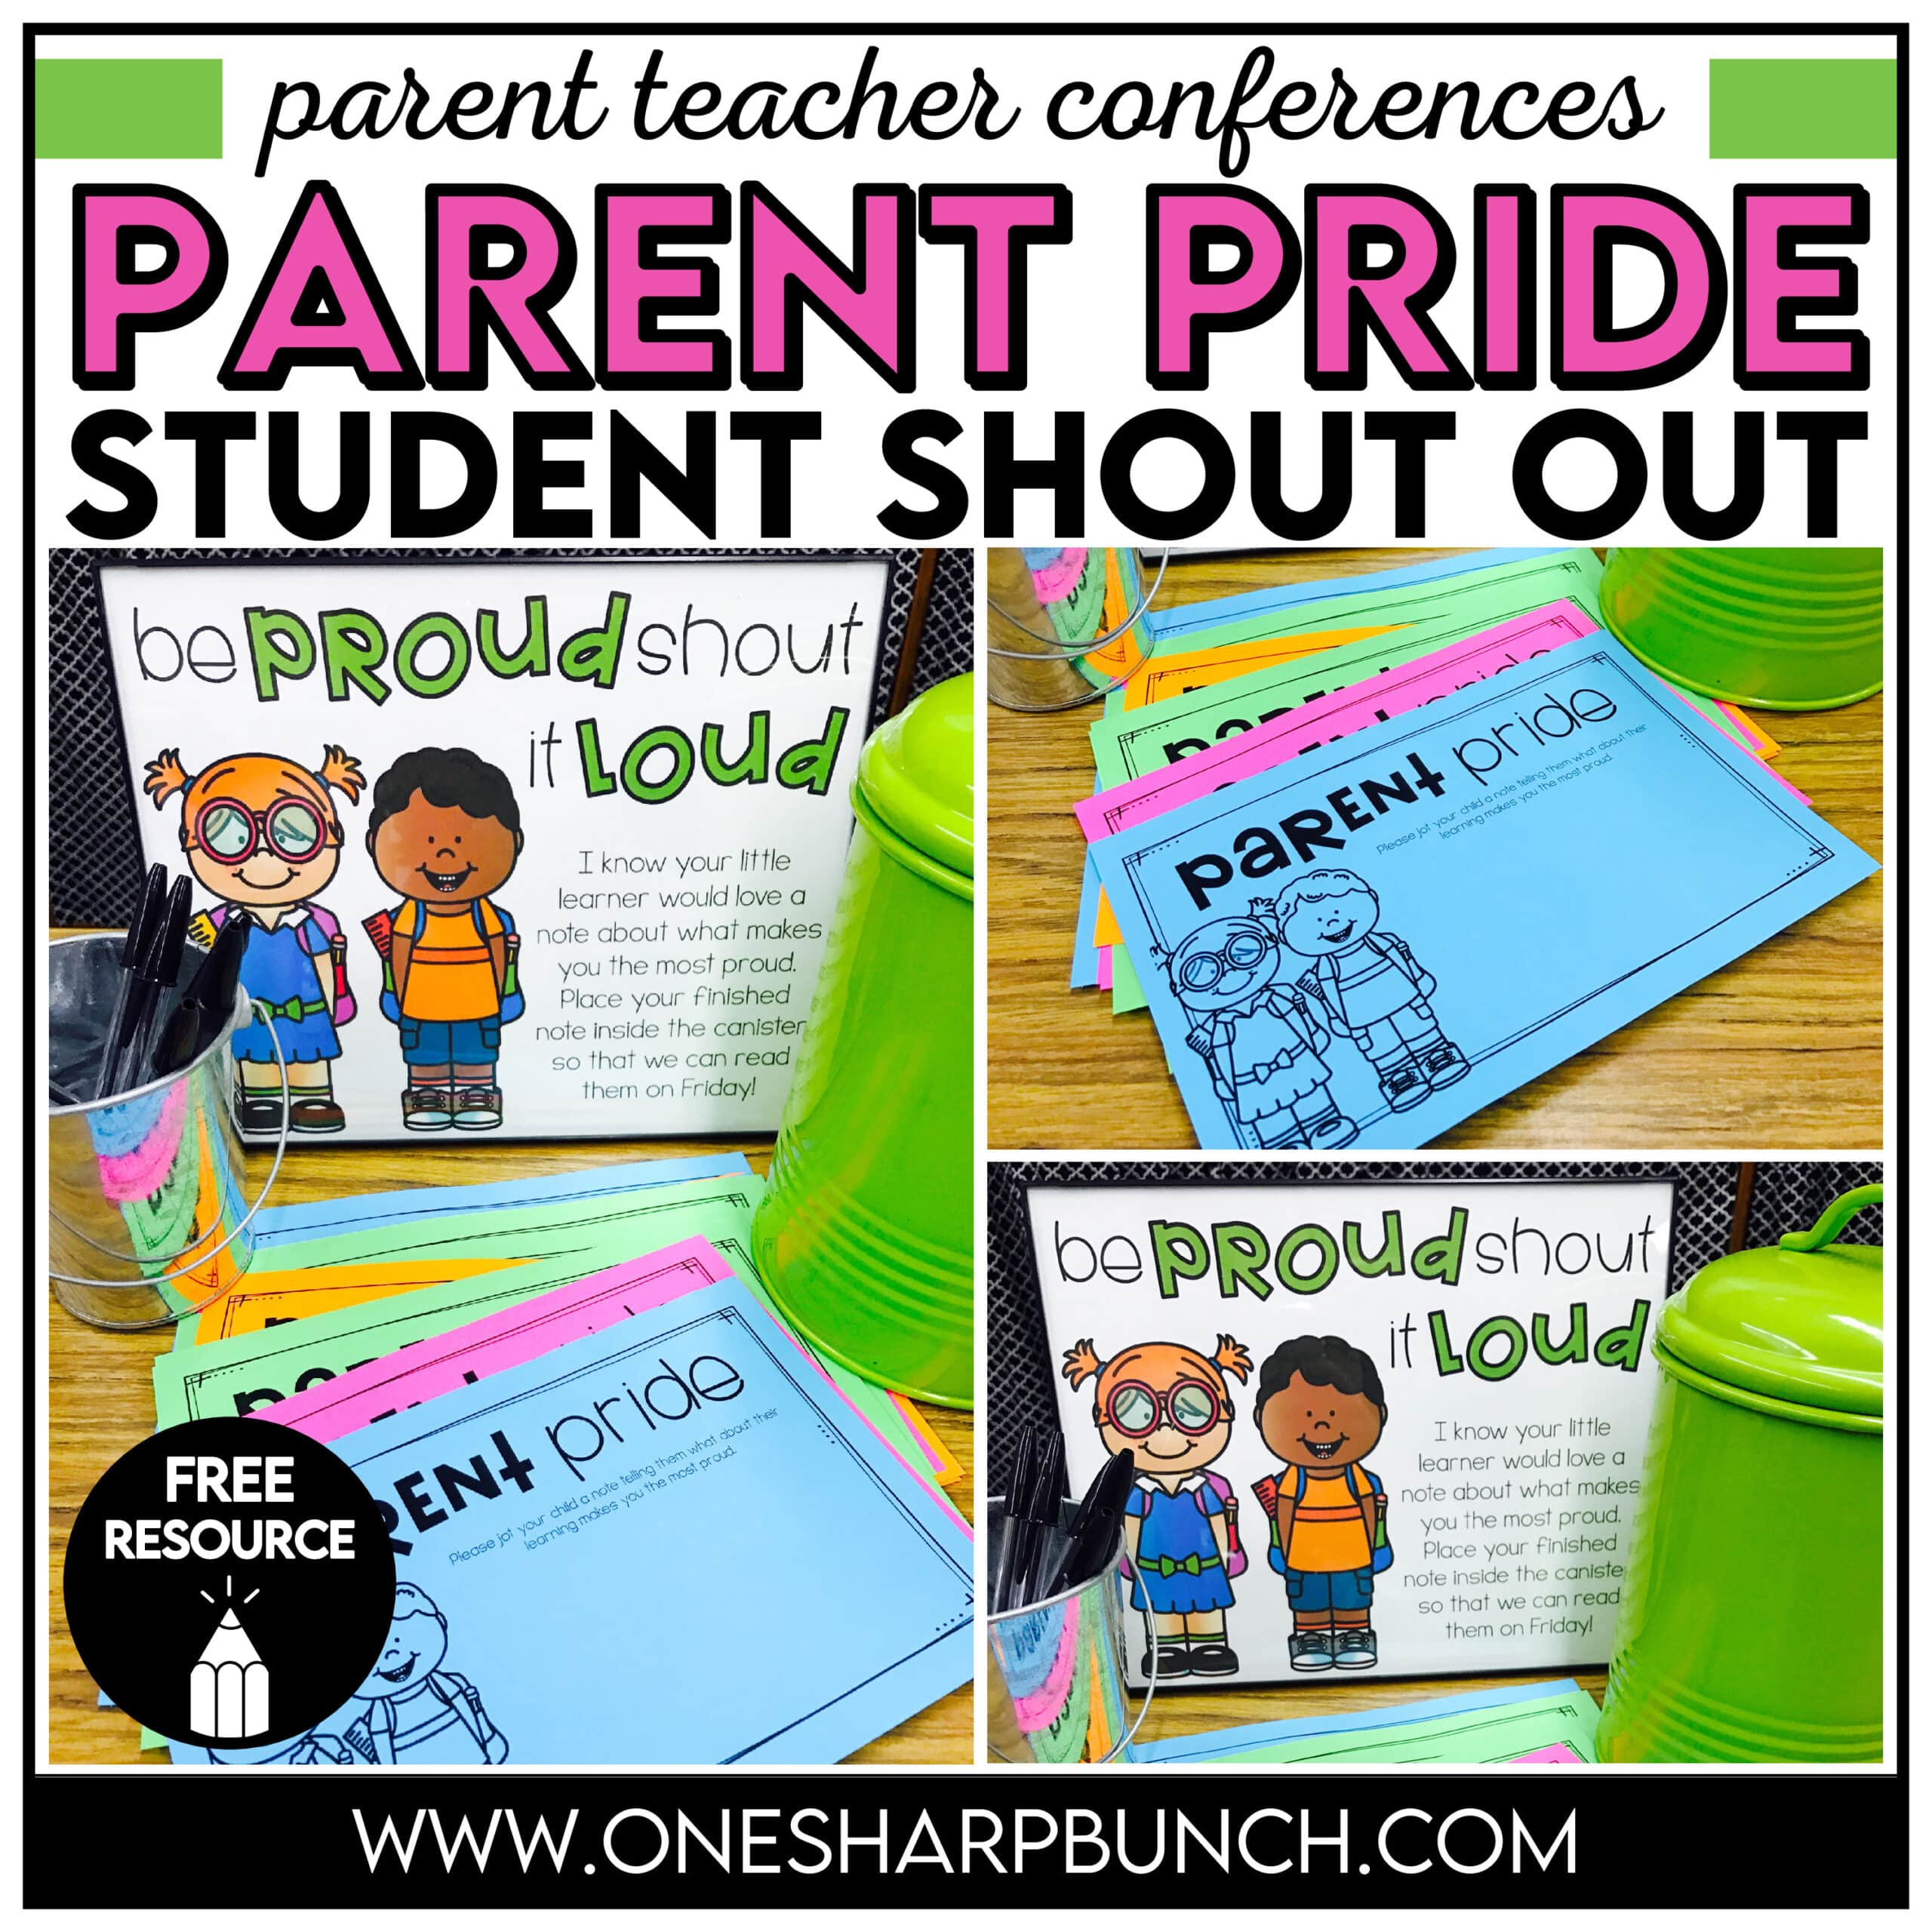 Make parent teacher conferences a more enjoyable experience with these fun parent pride shout out notes! These parent pride notes are a great way to help build student confidence. These free parent teacher conference printables can easily be set up in the hallway during parent teacher conference night or open house night. Students will love reading these positive notes from their parents. Download your free printable today!